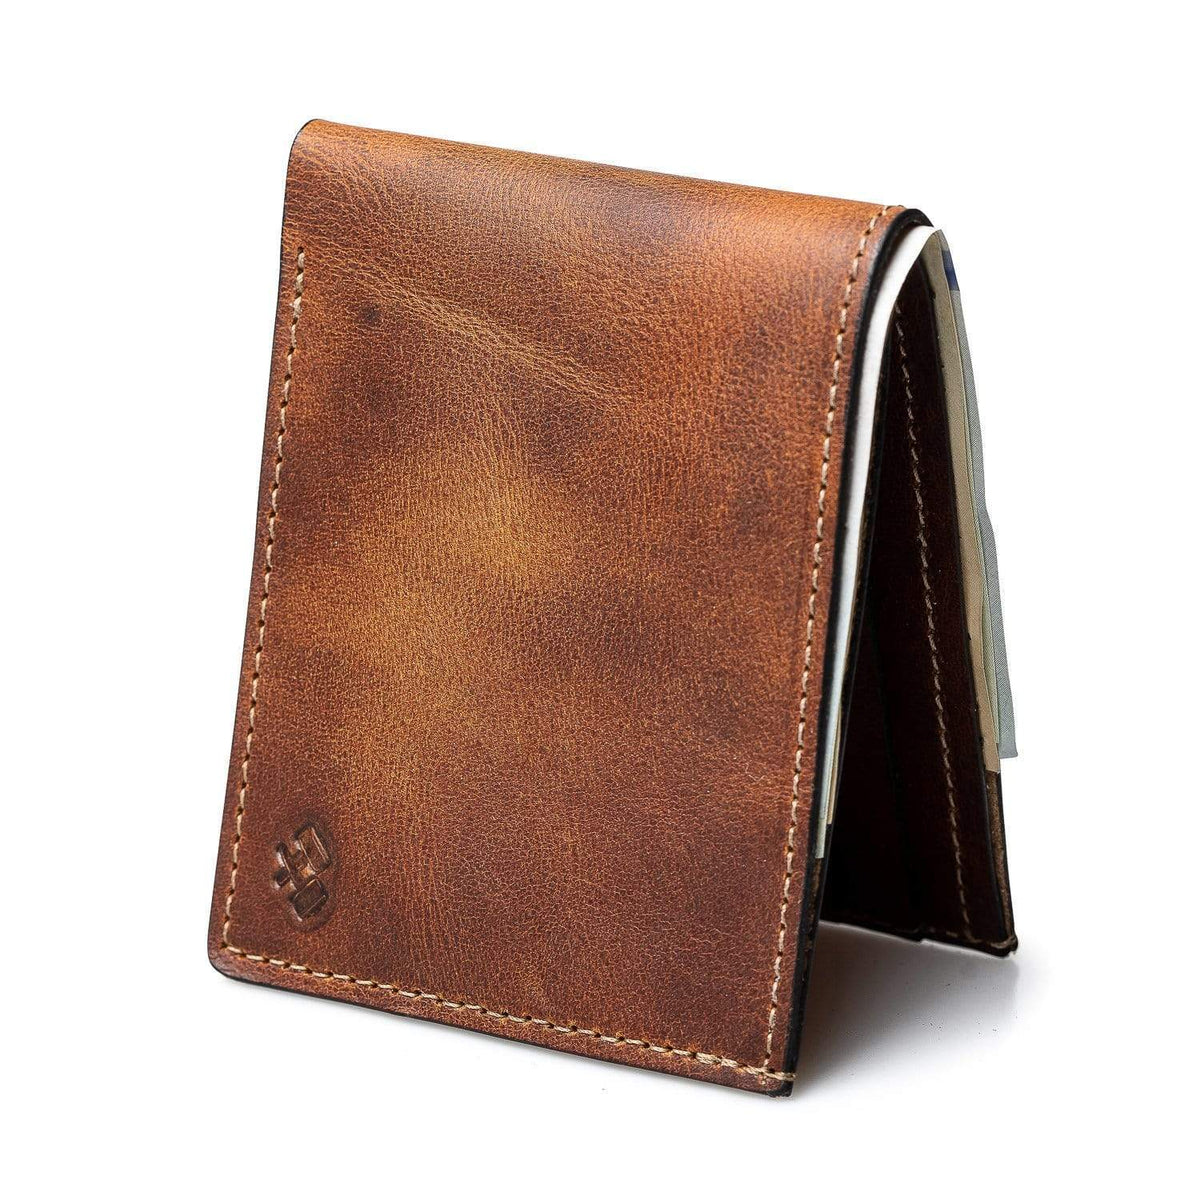 Main Street Forge Wallet Tobacco Snakebite Brown Bifold Leather Wallet For Men | Made in USA | Men&#39;s Bifold Wallets | American Made 816895021910